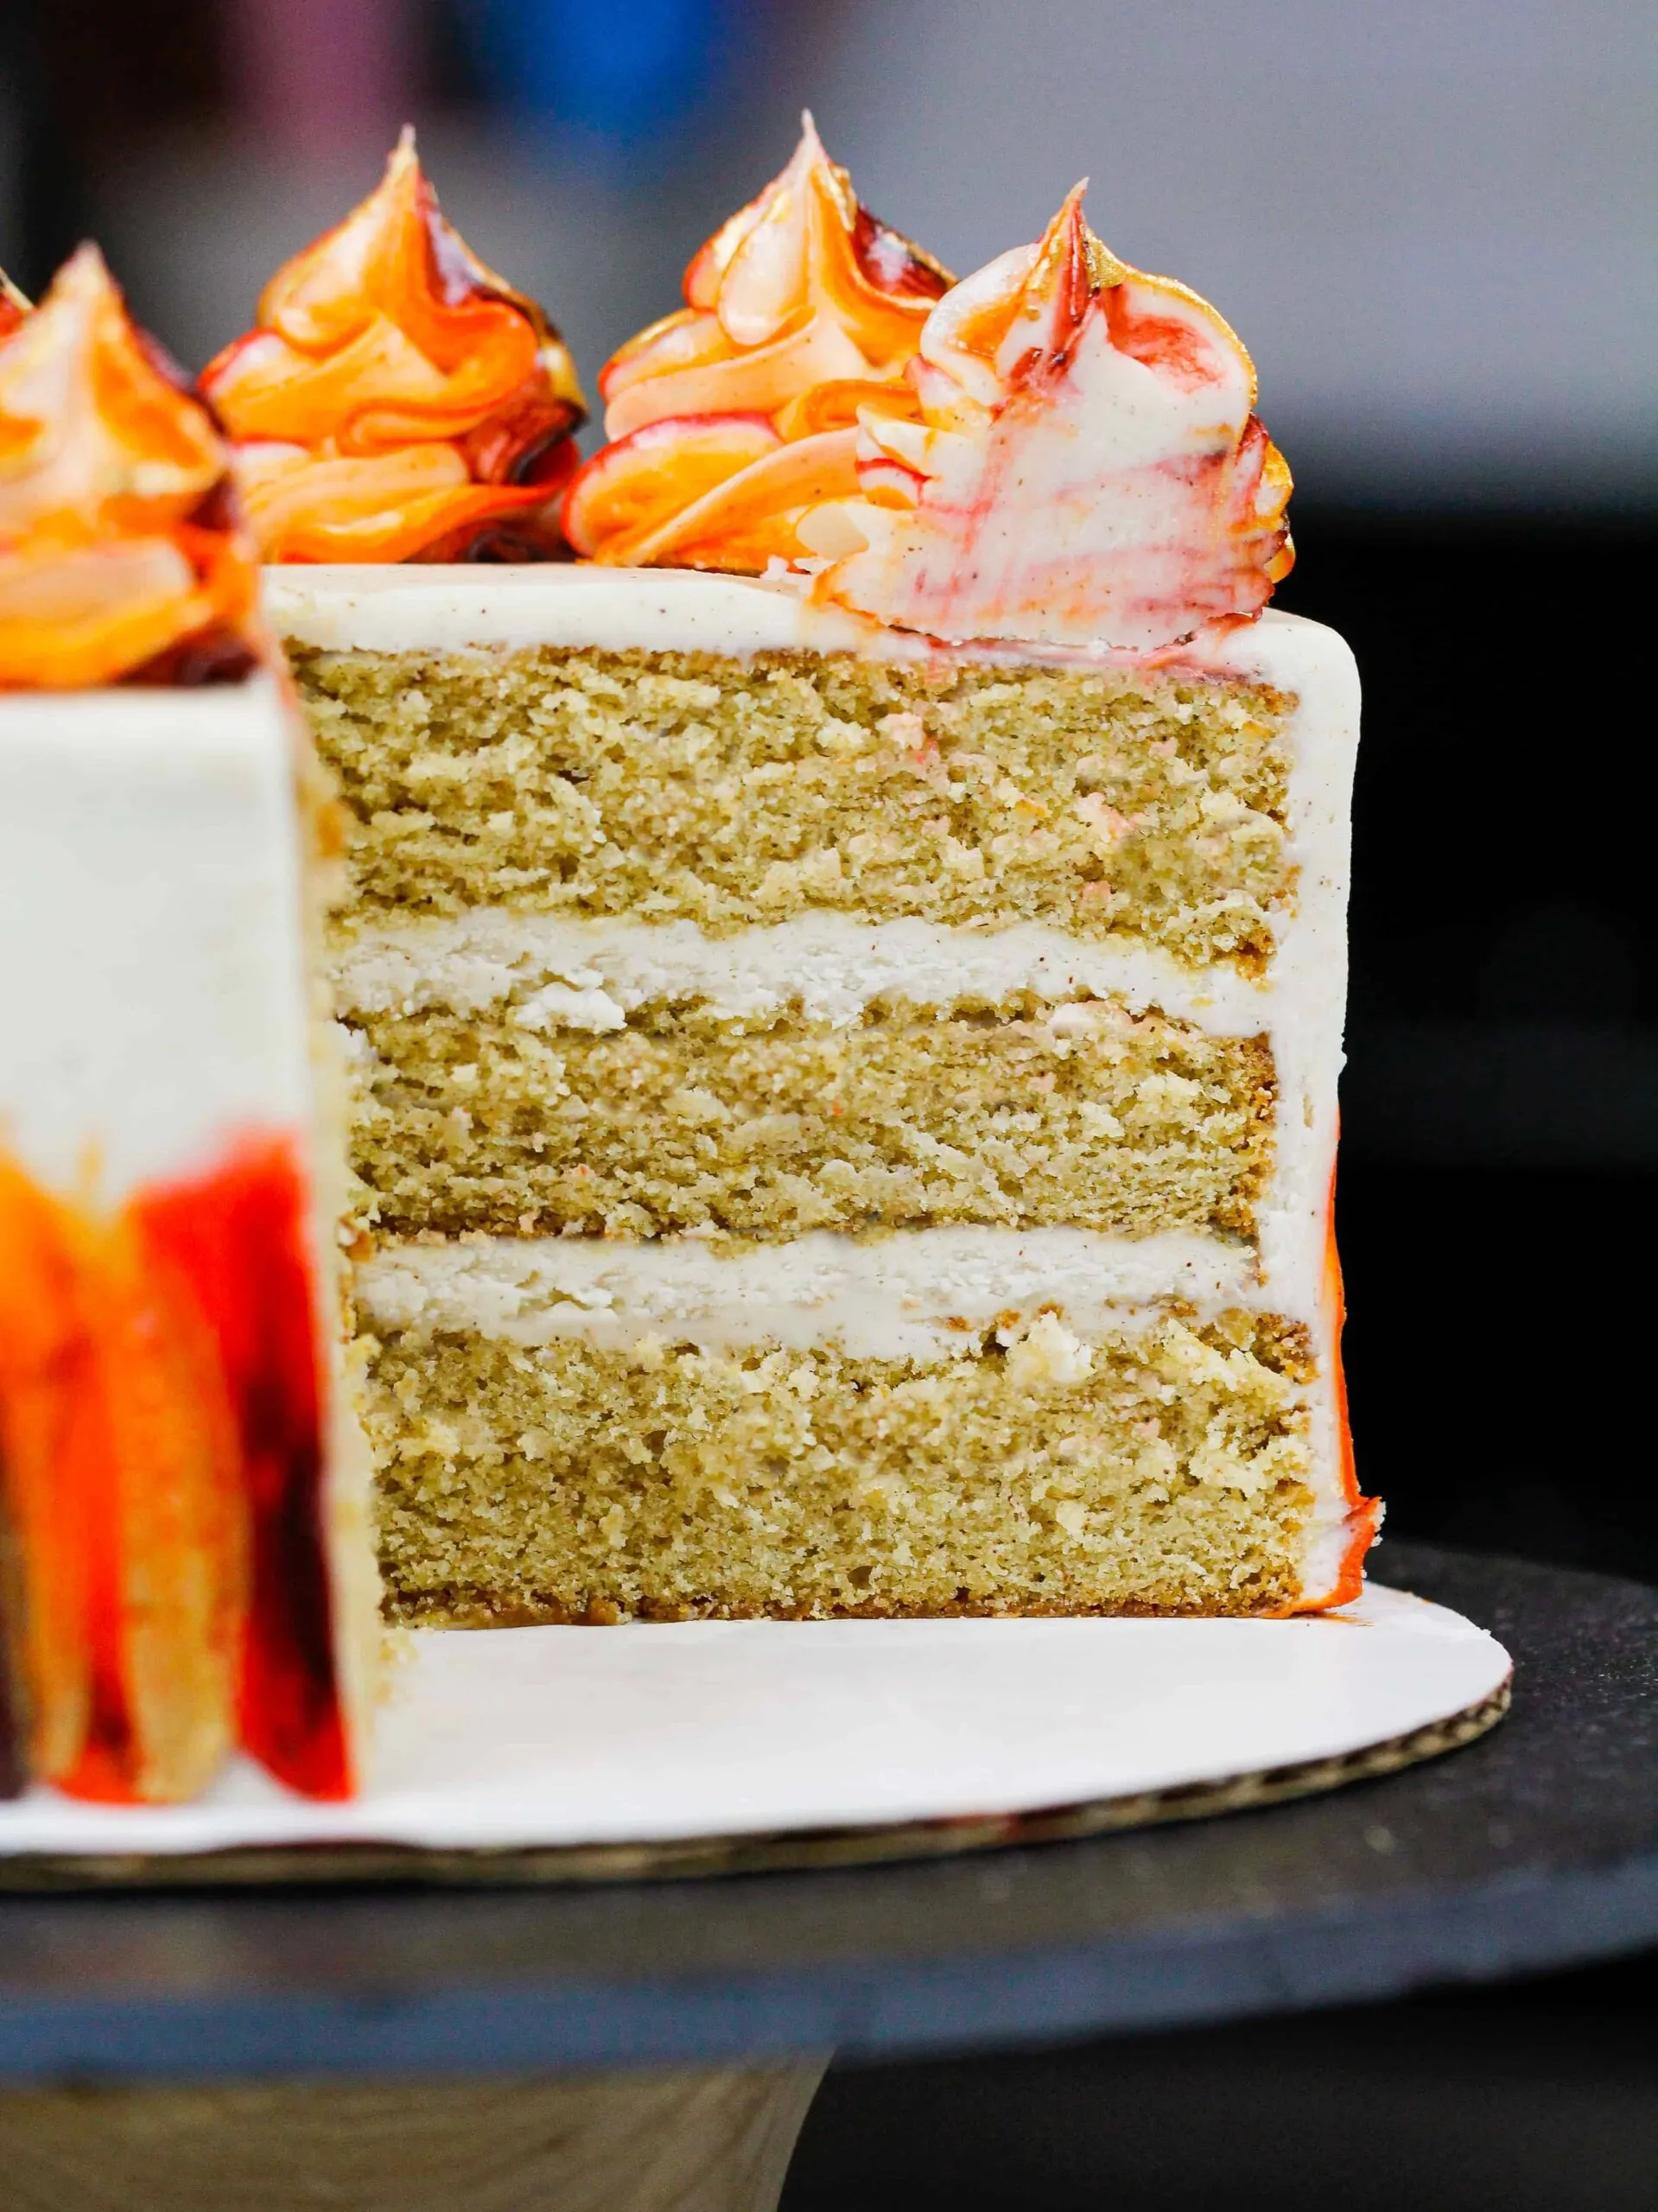 image of a layered spice cake that's been cut into to show the fluffy and tender texture of the cake layers